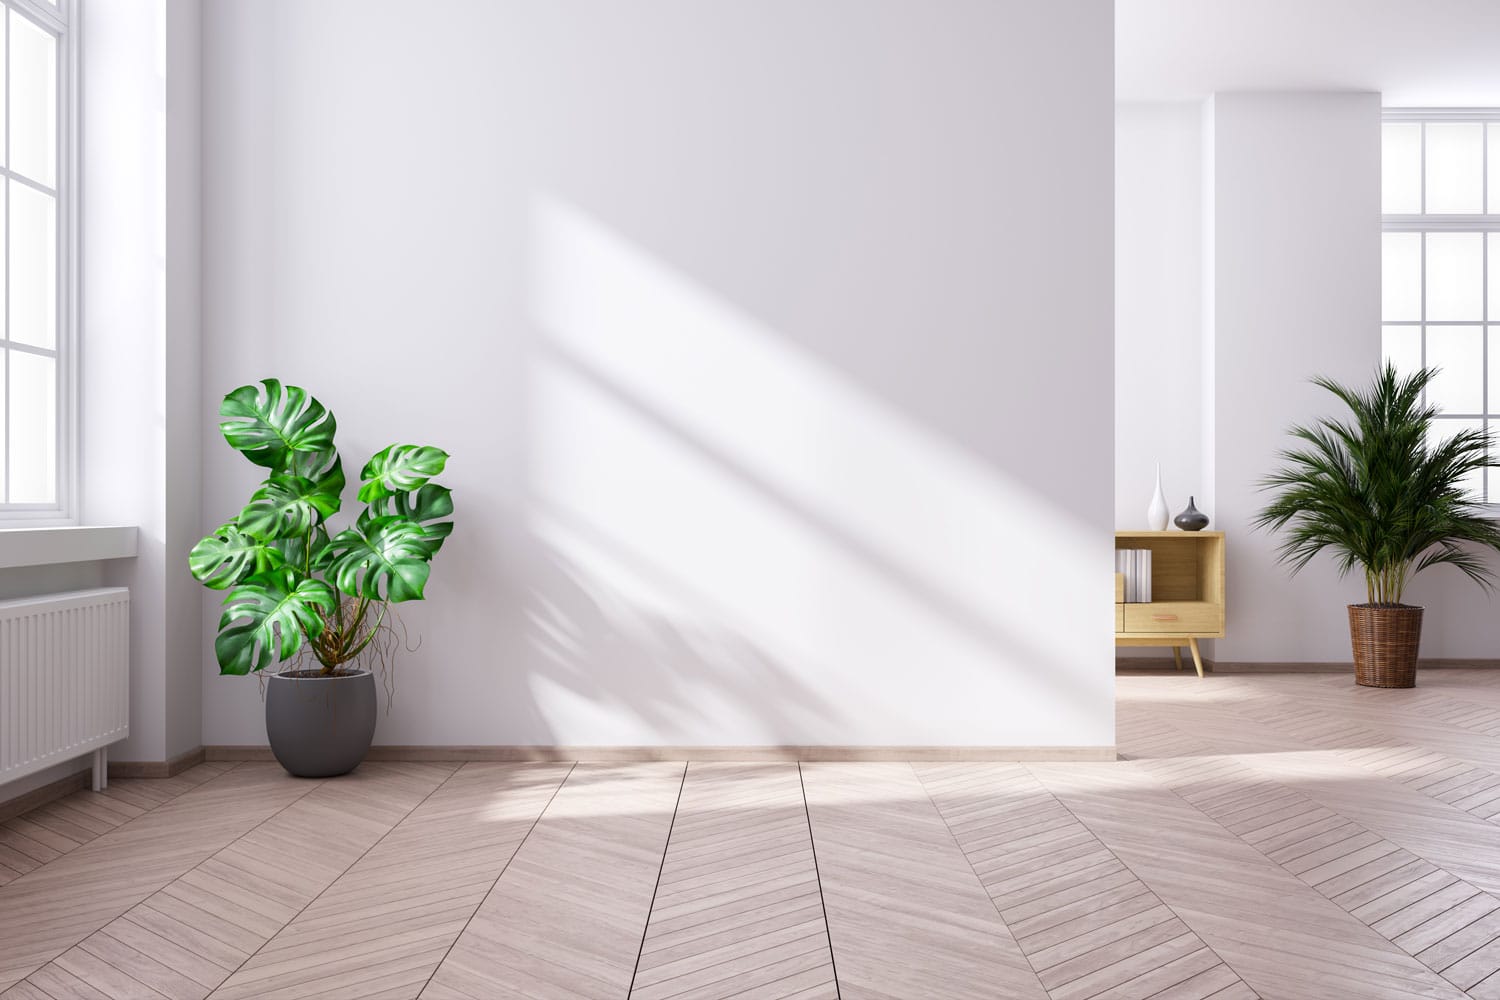 Plants inside a white living room with patterned flooring